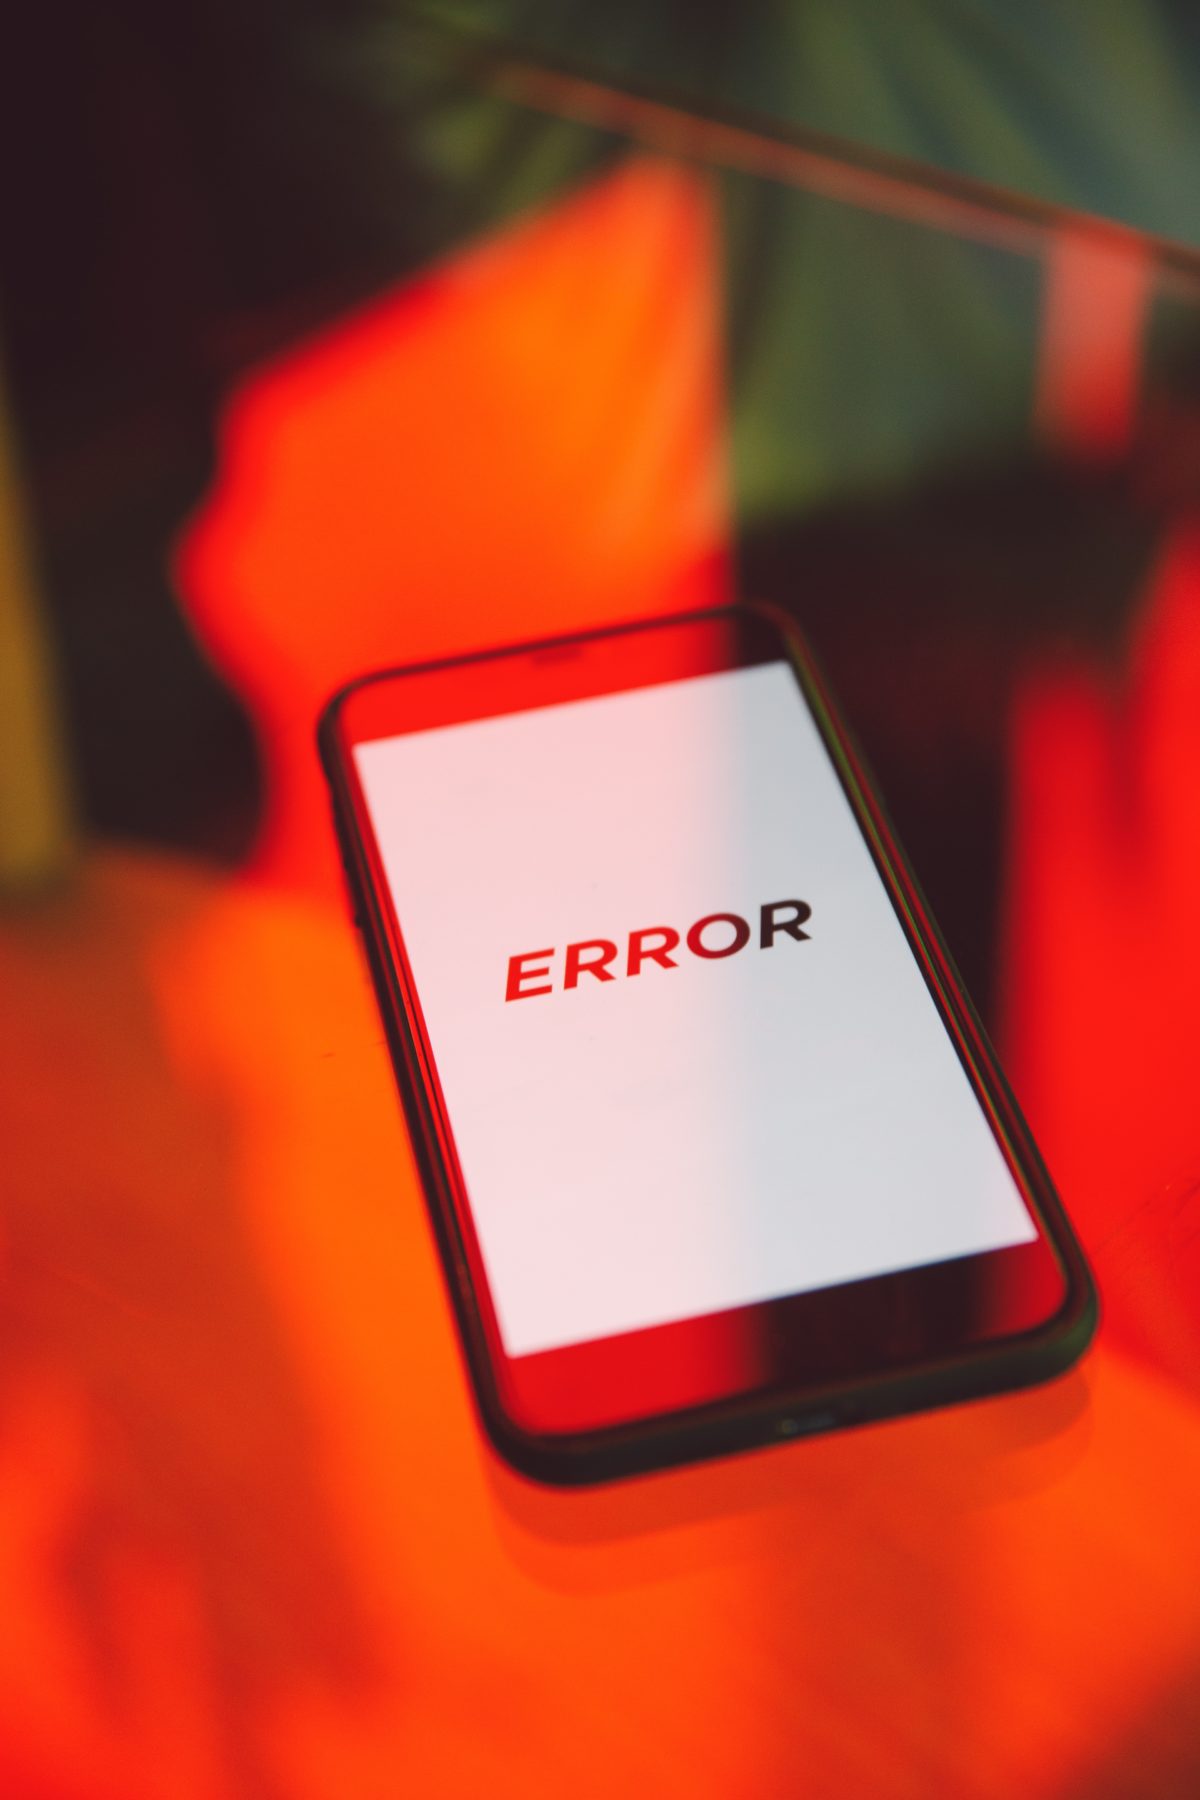 Phone screen with the word "Error" on it.